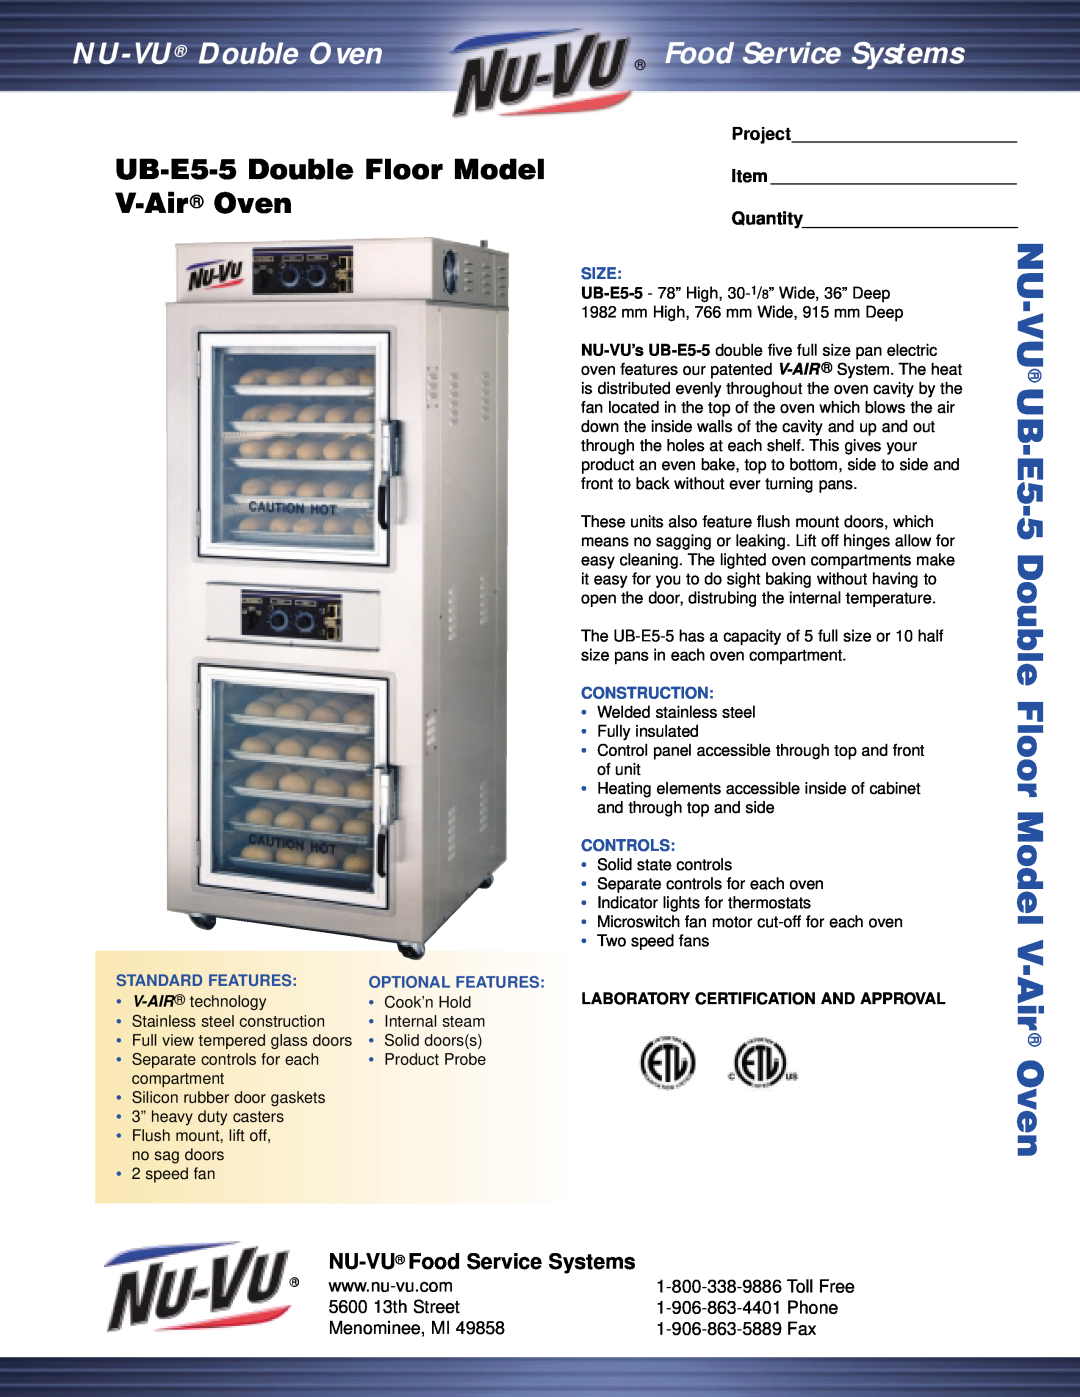 Middleby Cooking Systems Group manual UB-E5-5Double Floor Model V-Air Oven, NU-VU Food Service Systems, Phone, Size 